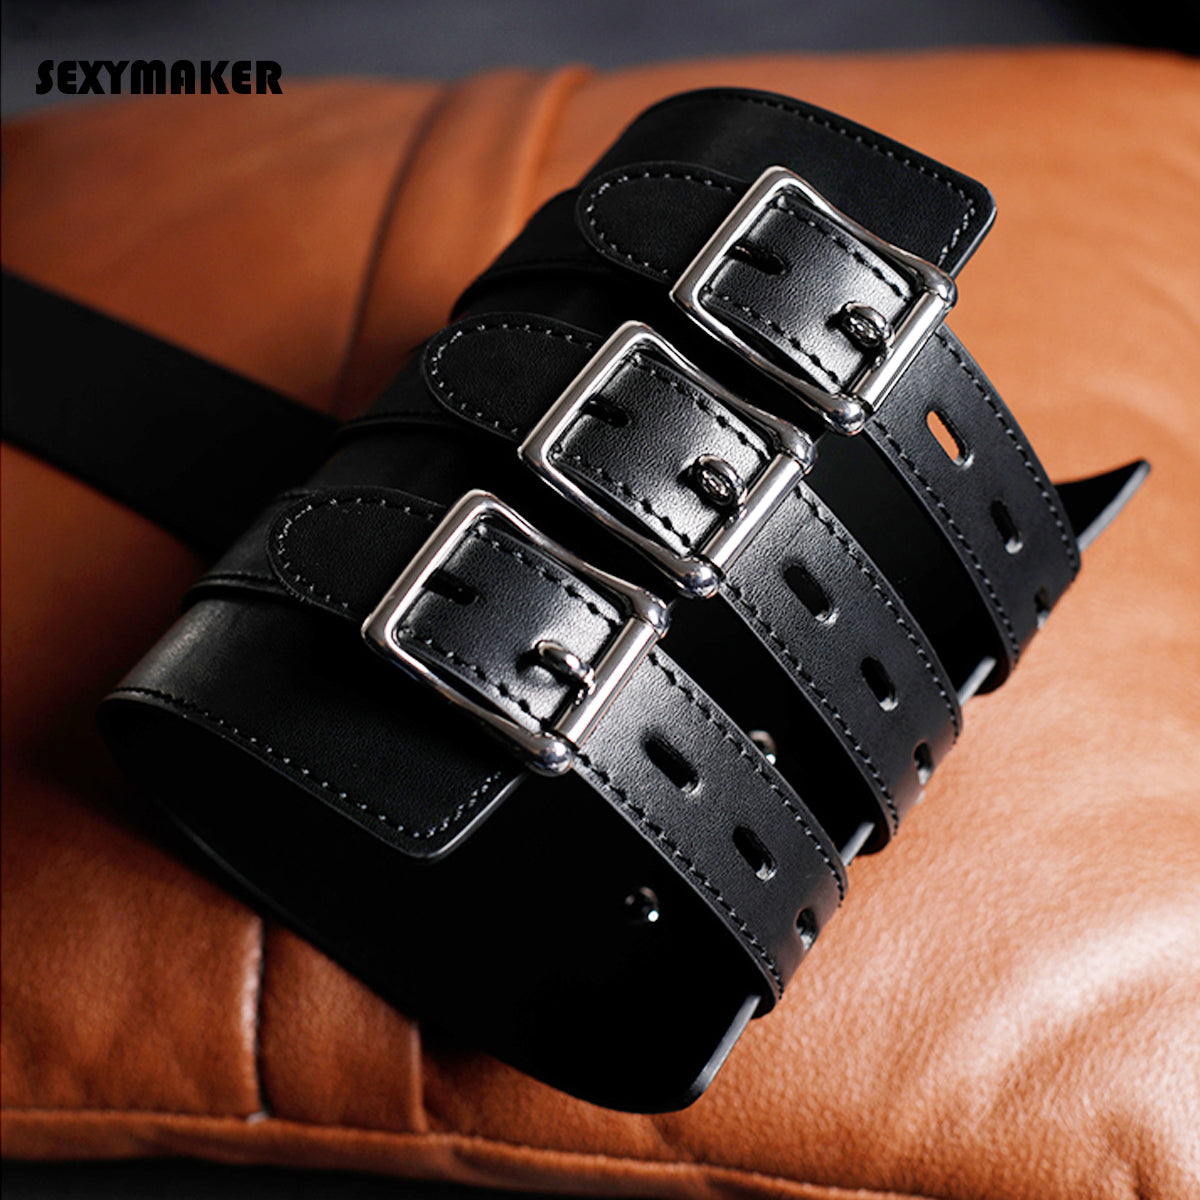 Strict Leather Arm Binder and Handcuff Restraint